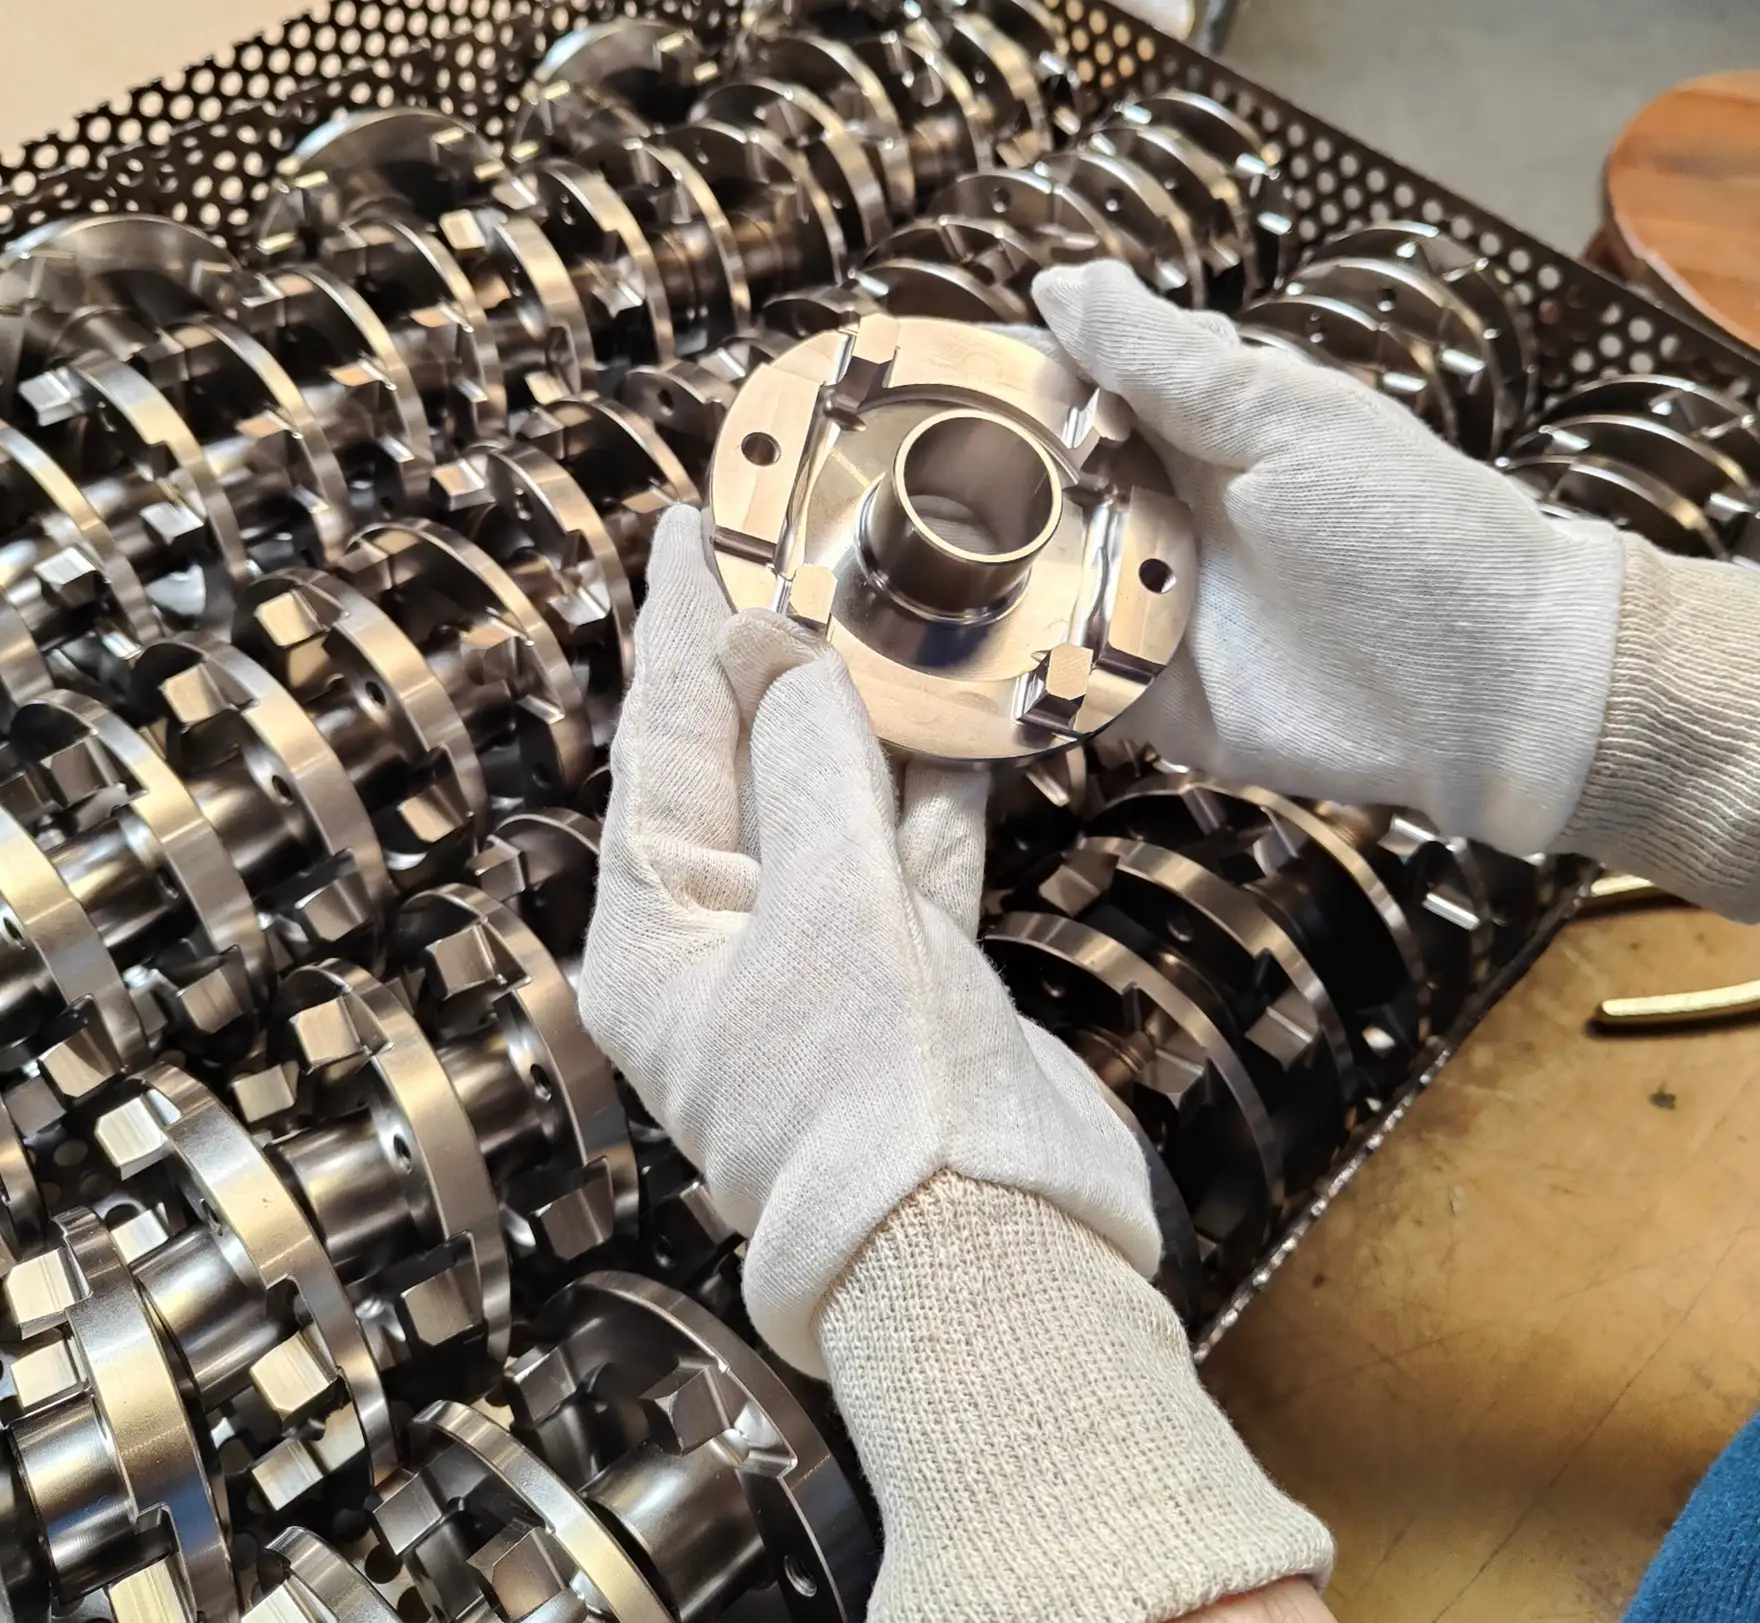 Aluminum nickel-plated pieces, carefully handled with white gloves, as part of a final visual inspection before their ultimate packaging. The high-phosphorus electroless nickel finish not only provides corrosion protection but also an elegant aesthetic. This meticulous inspection ensures compliance and impeccable quality of the pieces before their release.